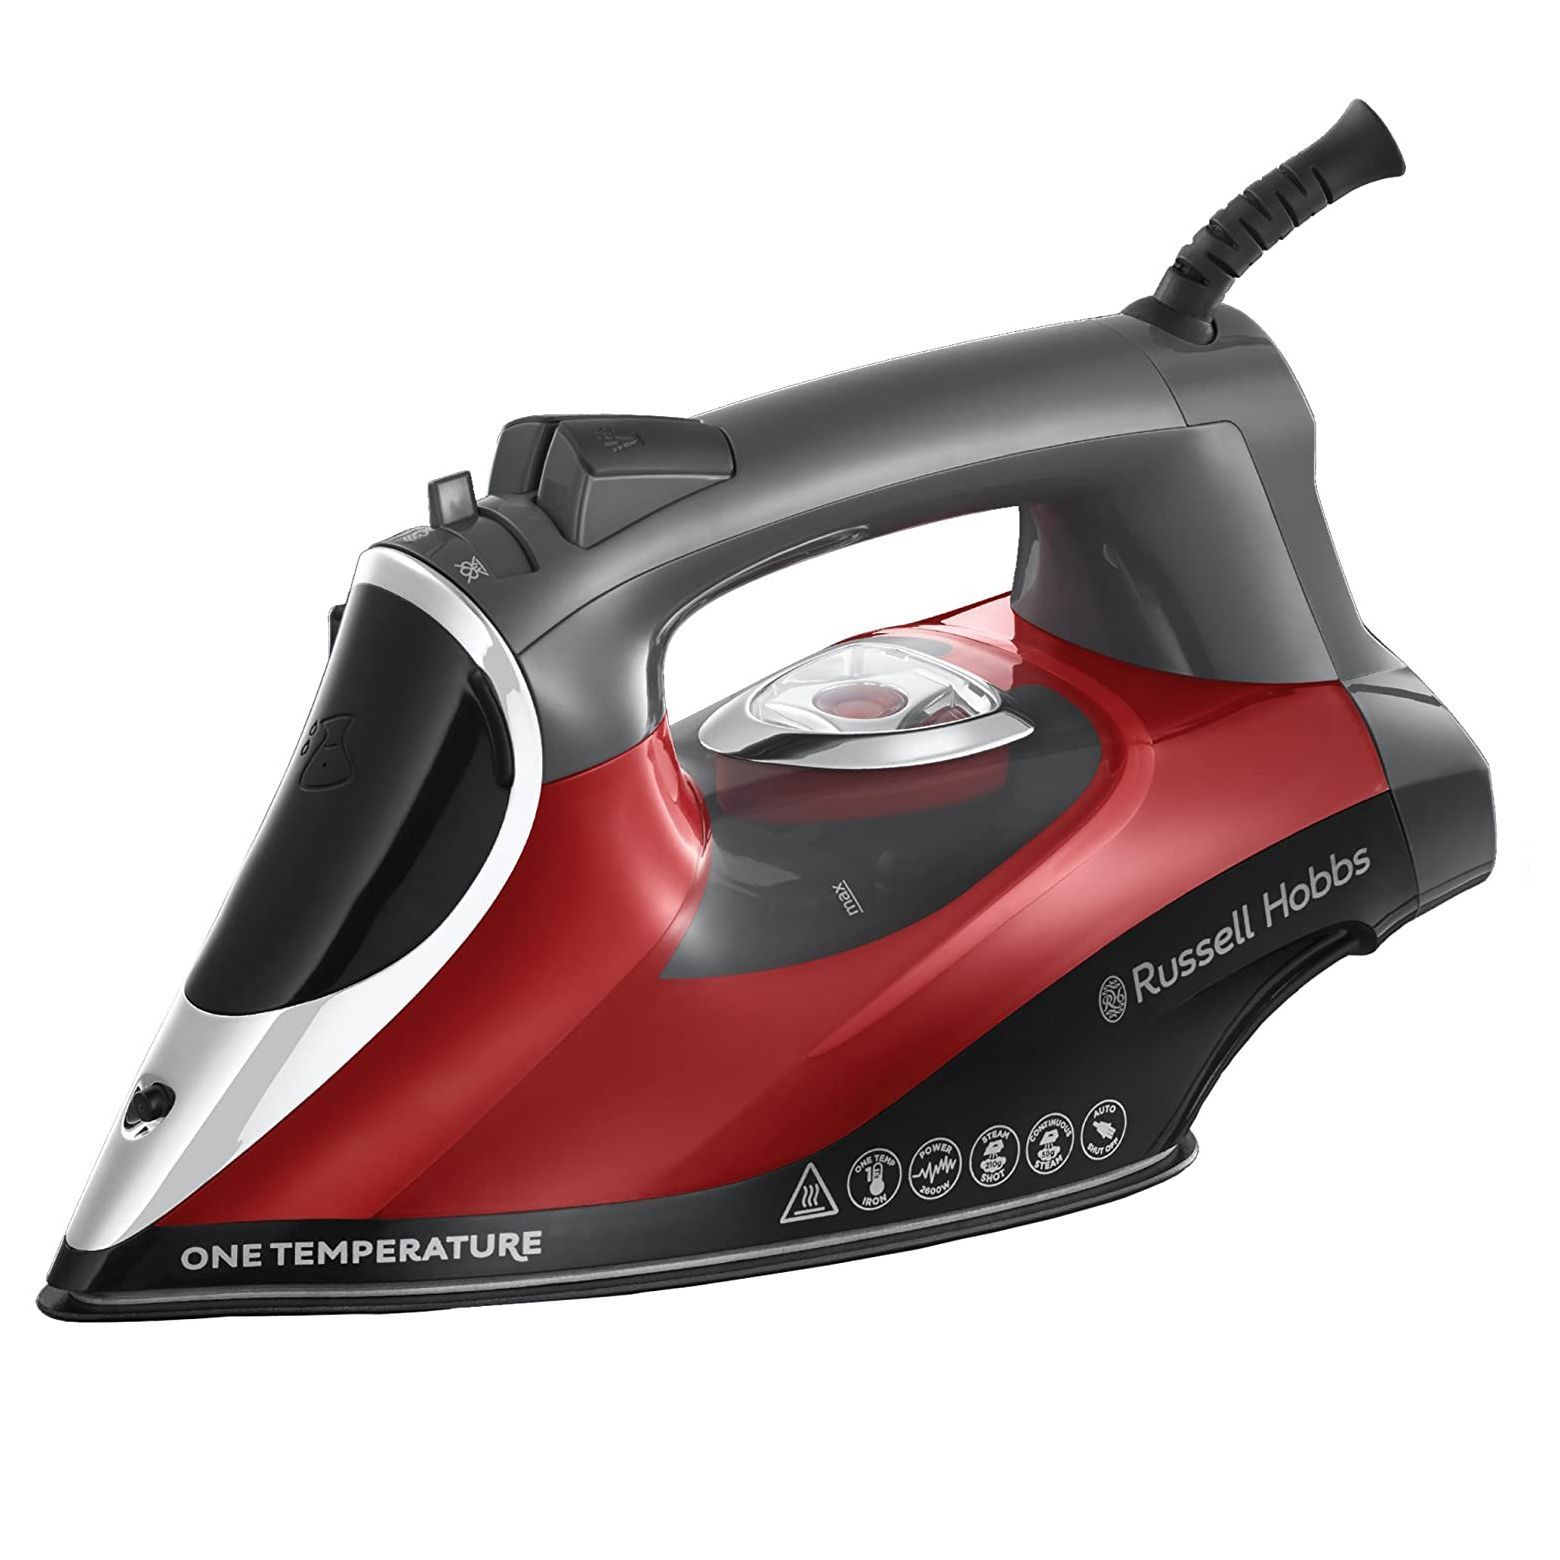 2000W Easy Steam 2 in 1 Corded Cordless Ceramic Steam Iron Plus Sturdy Base Unit Red /& Black